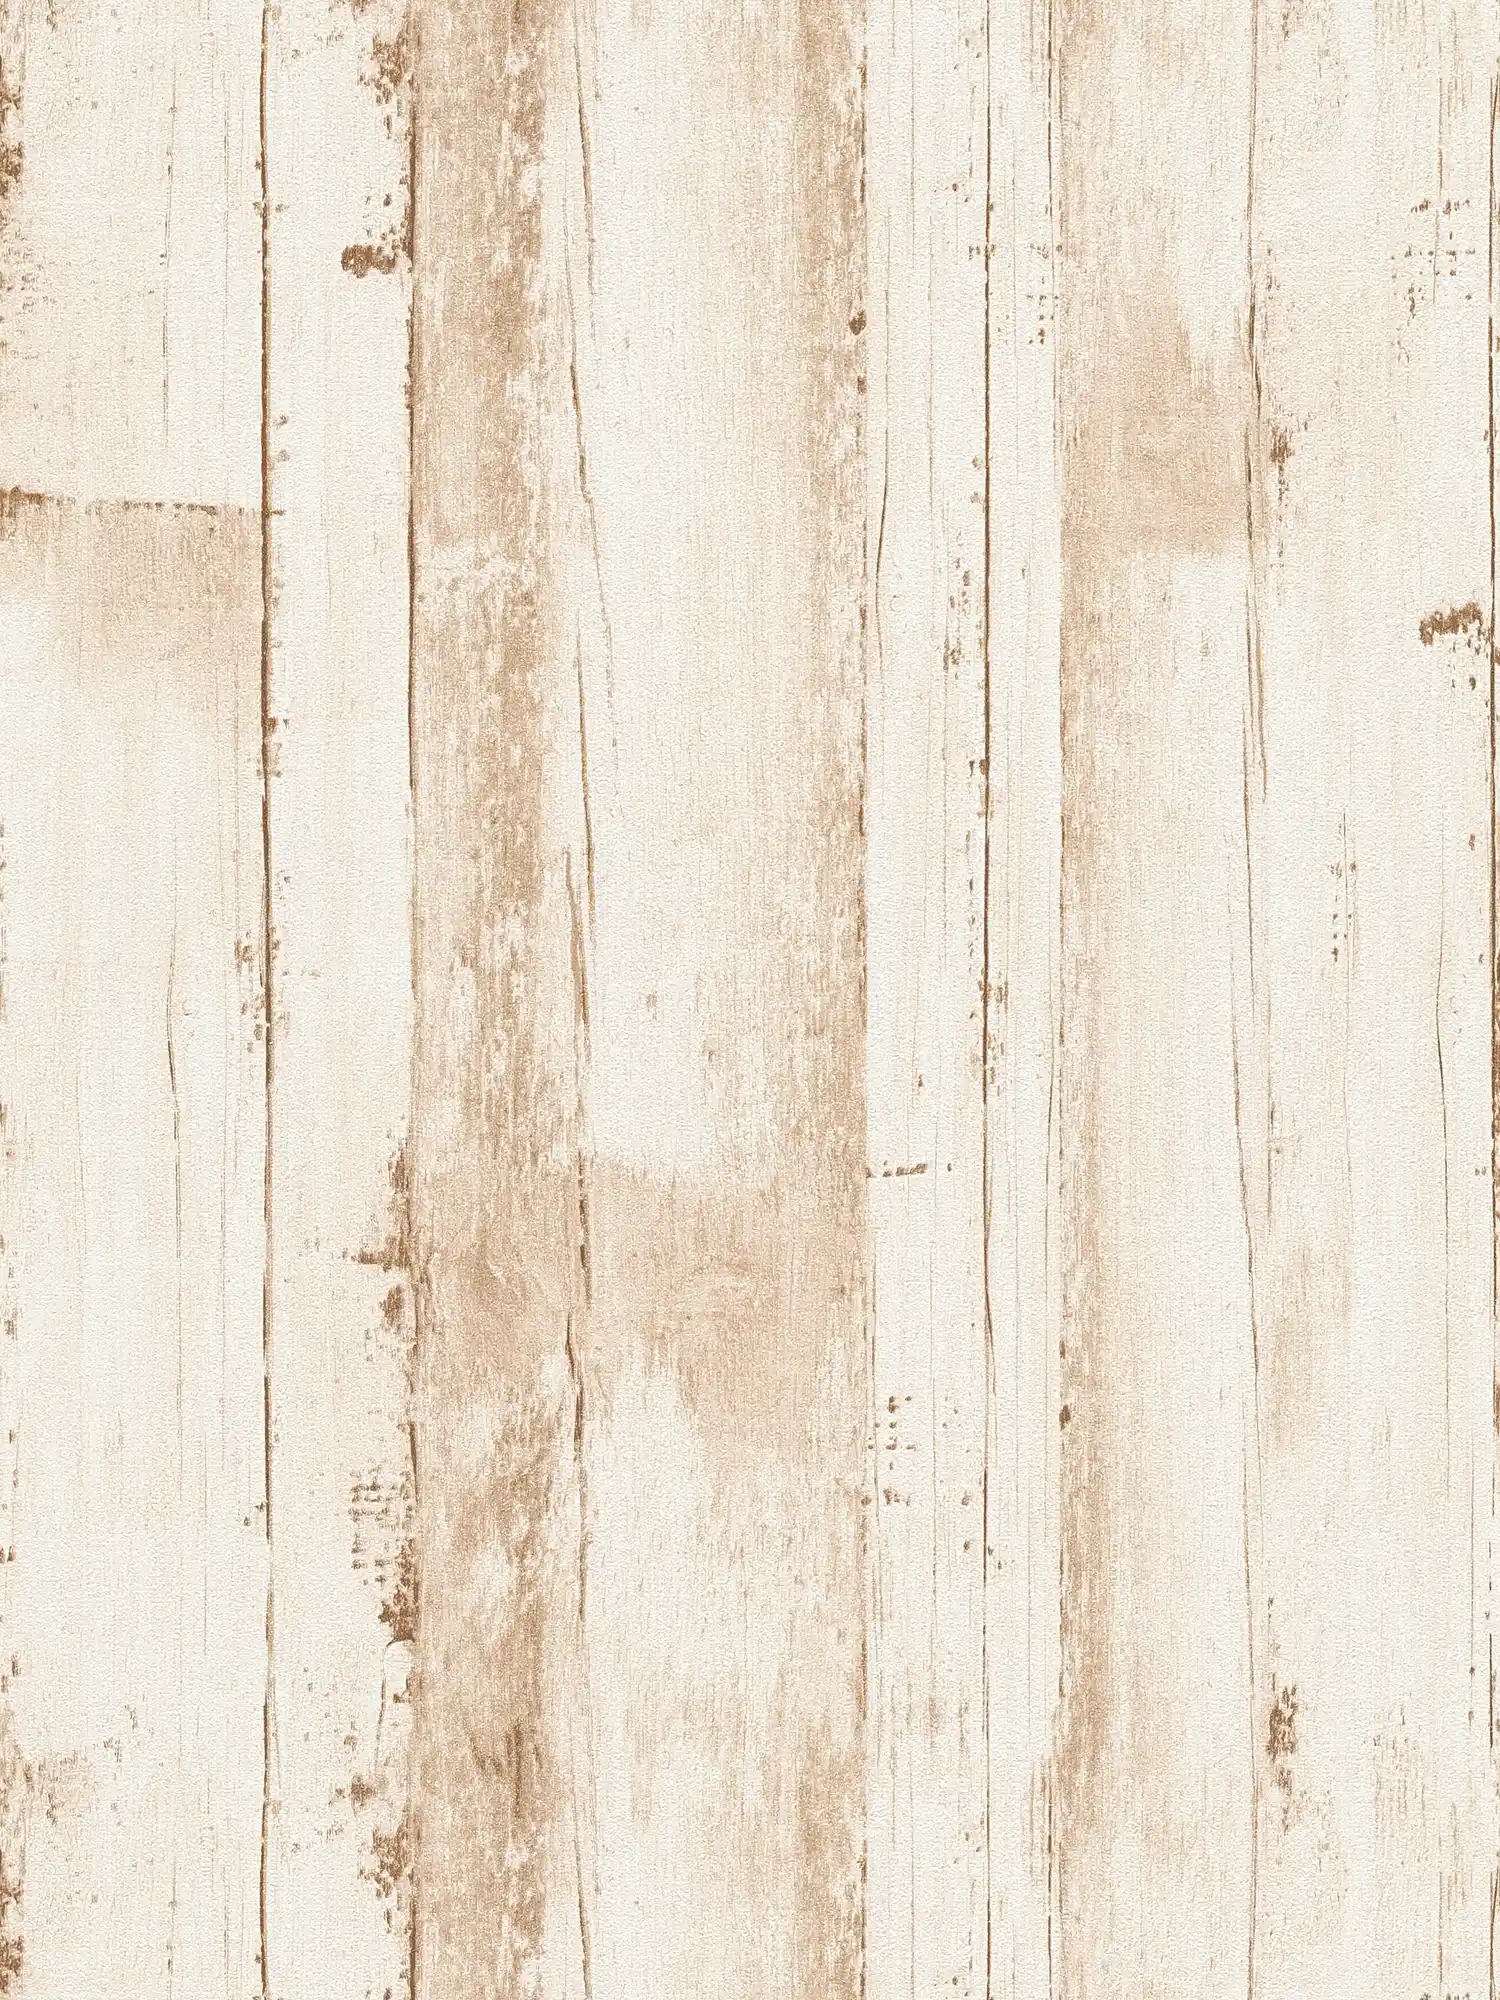         Non-woven wood wallpaper with plank look PVC-free - Beige, White
    